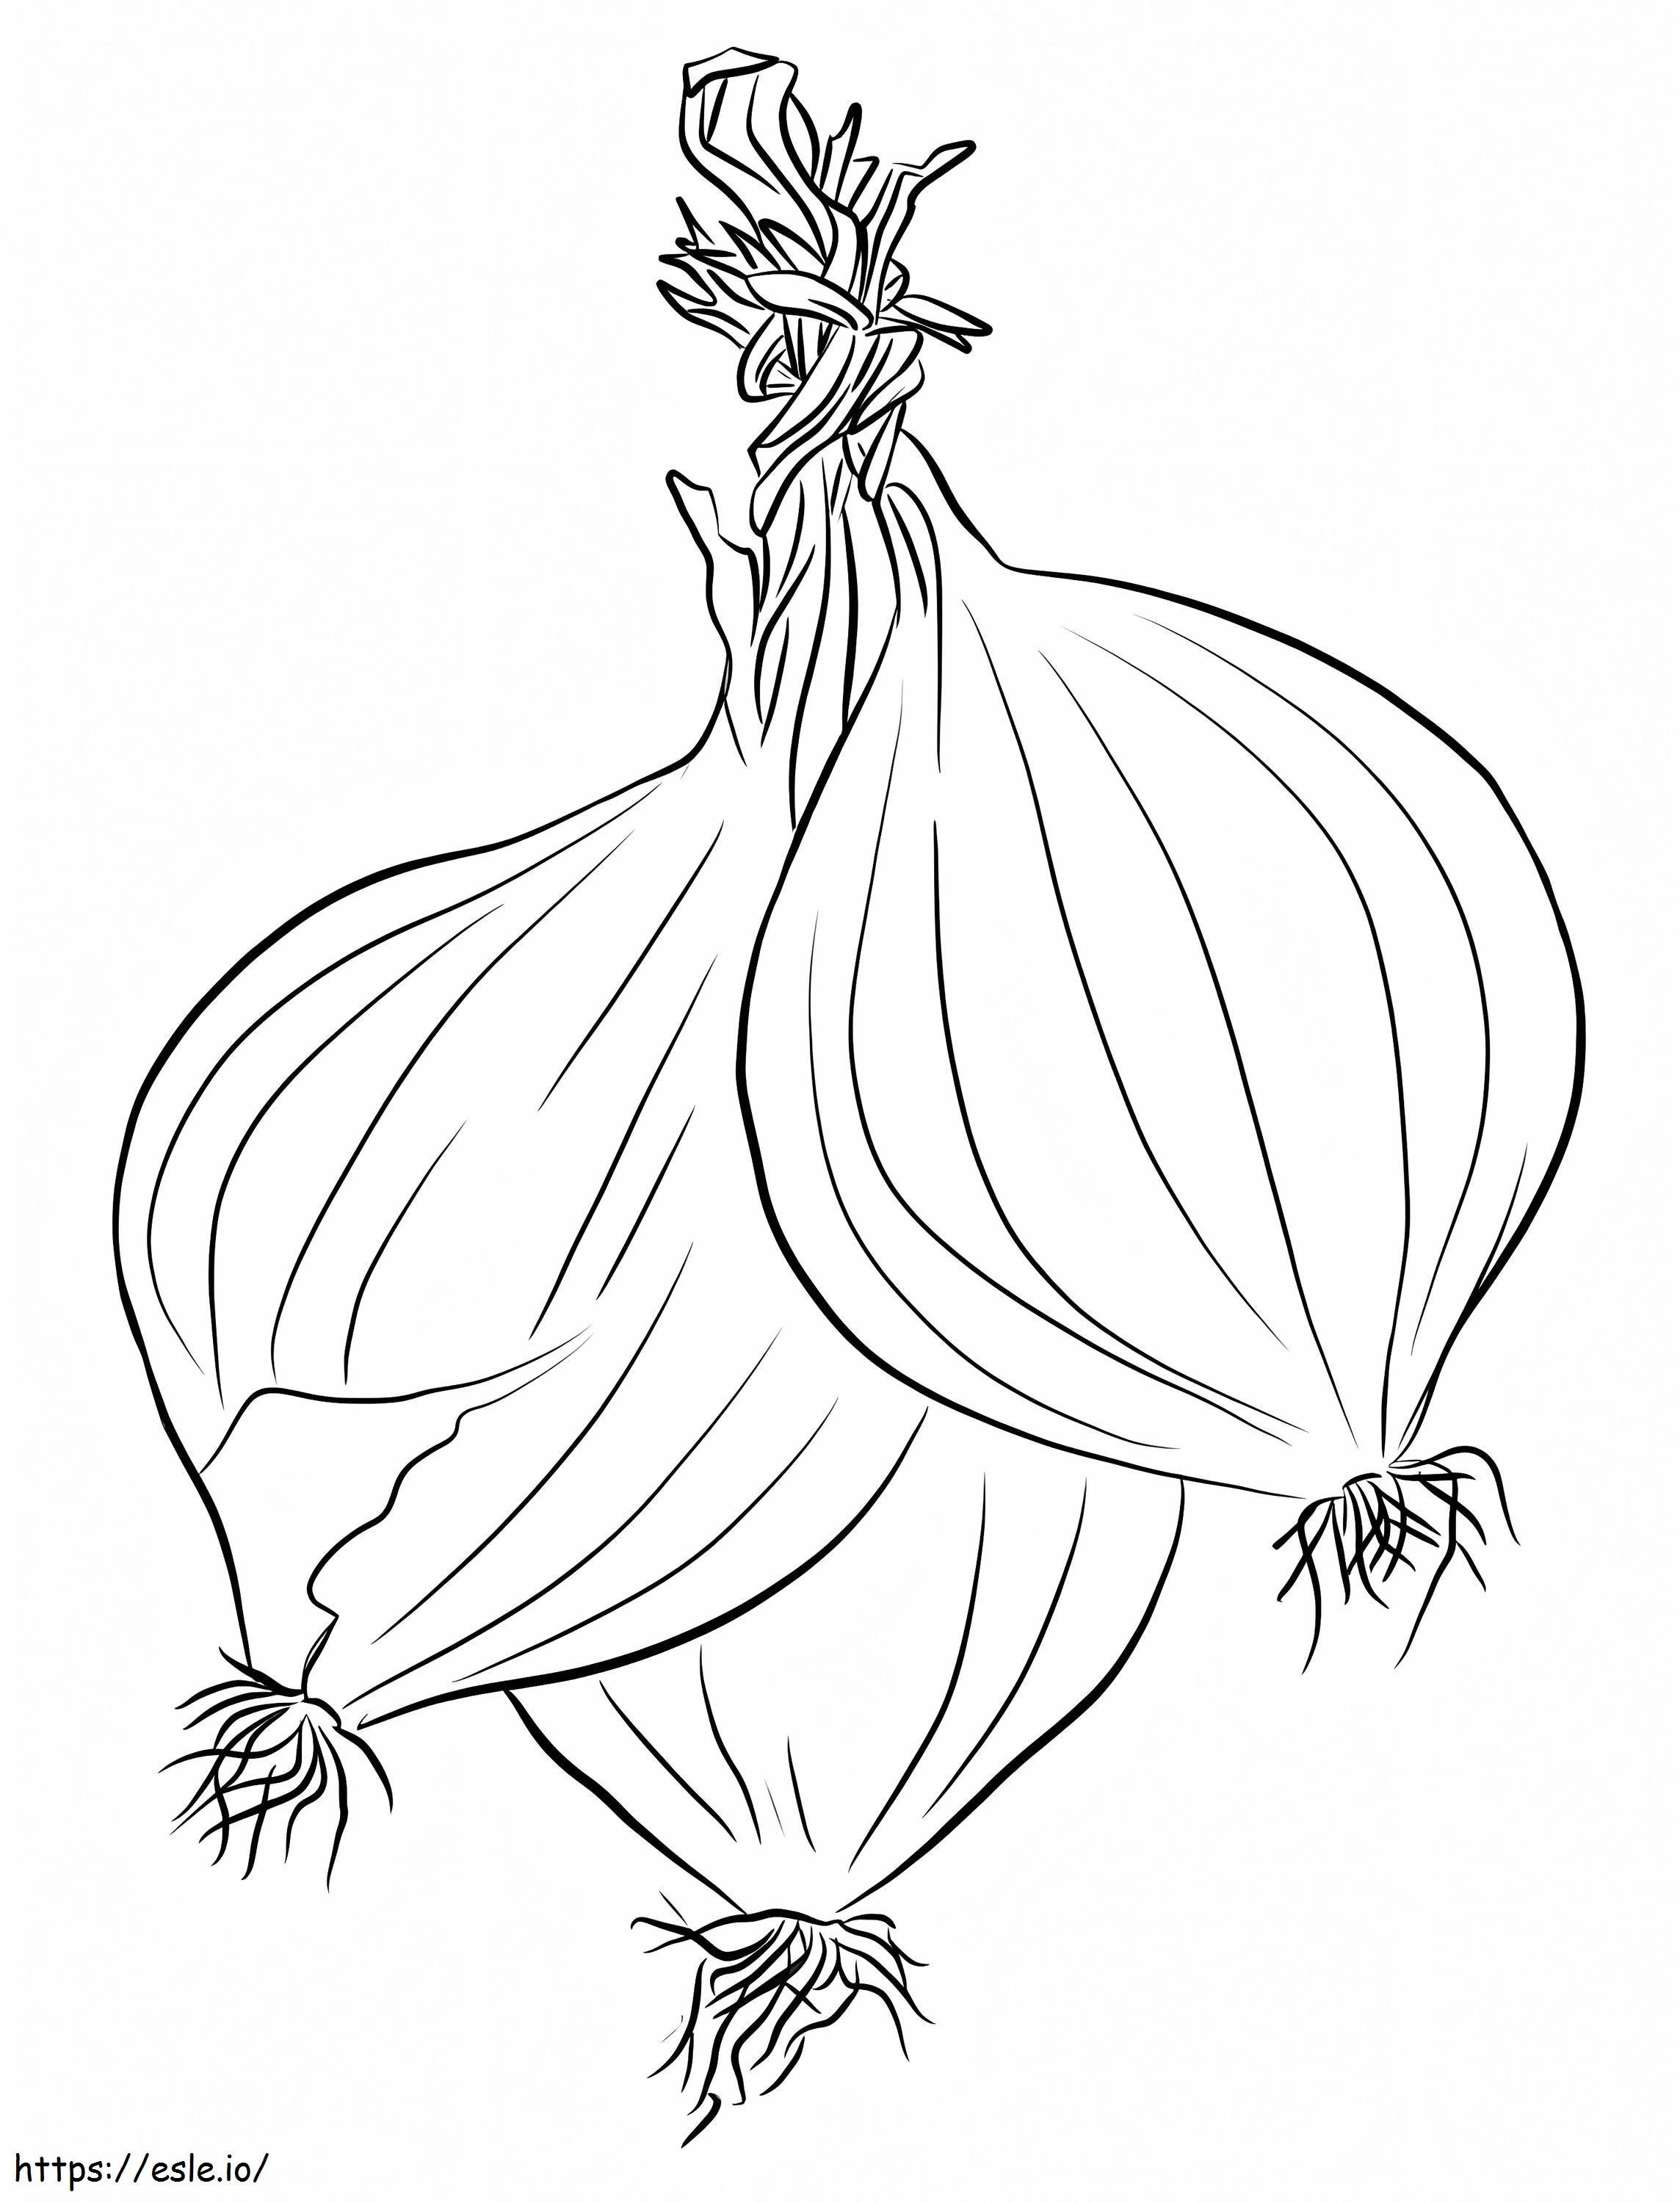 Three Onions coloring page